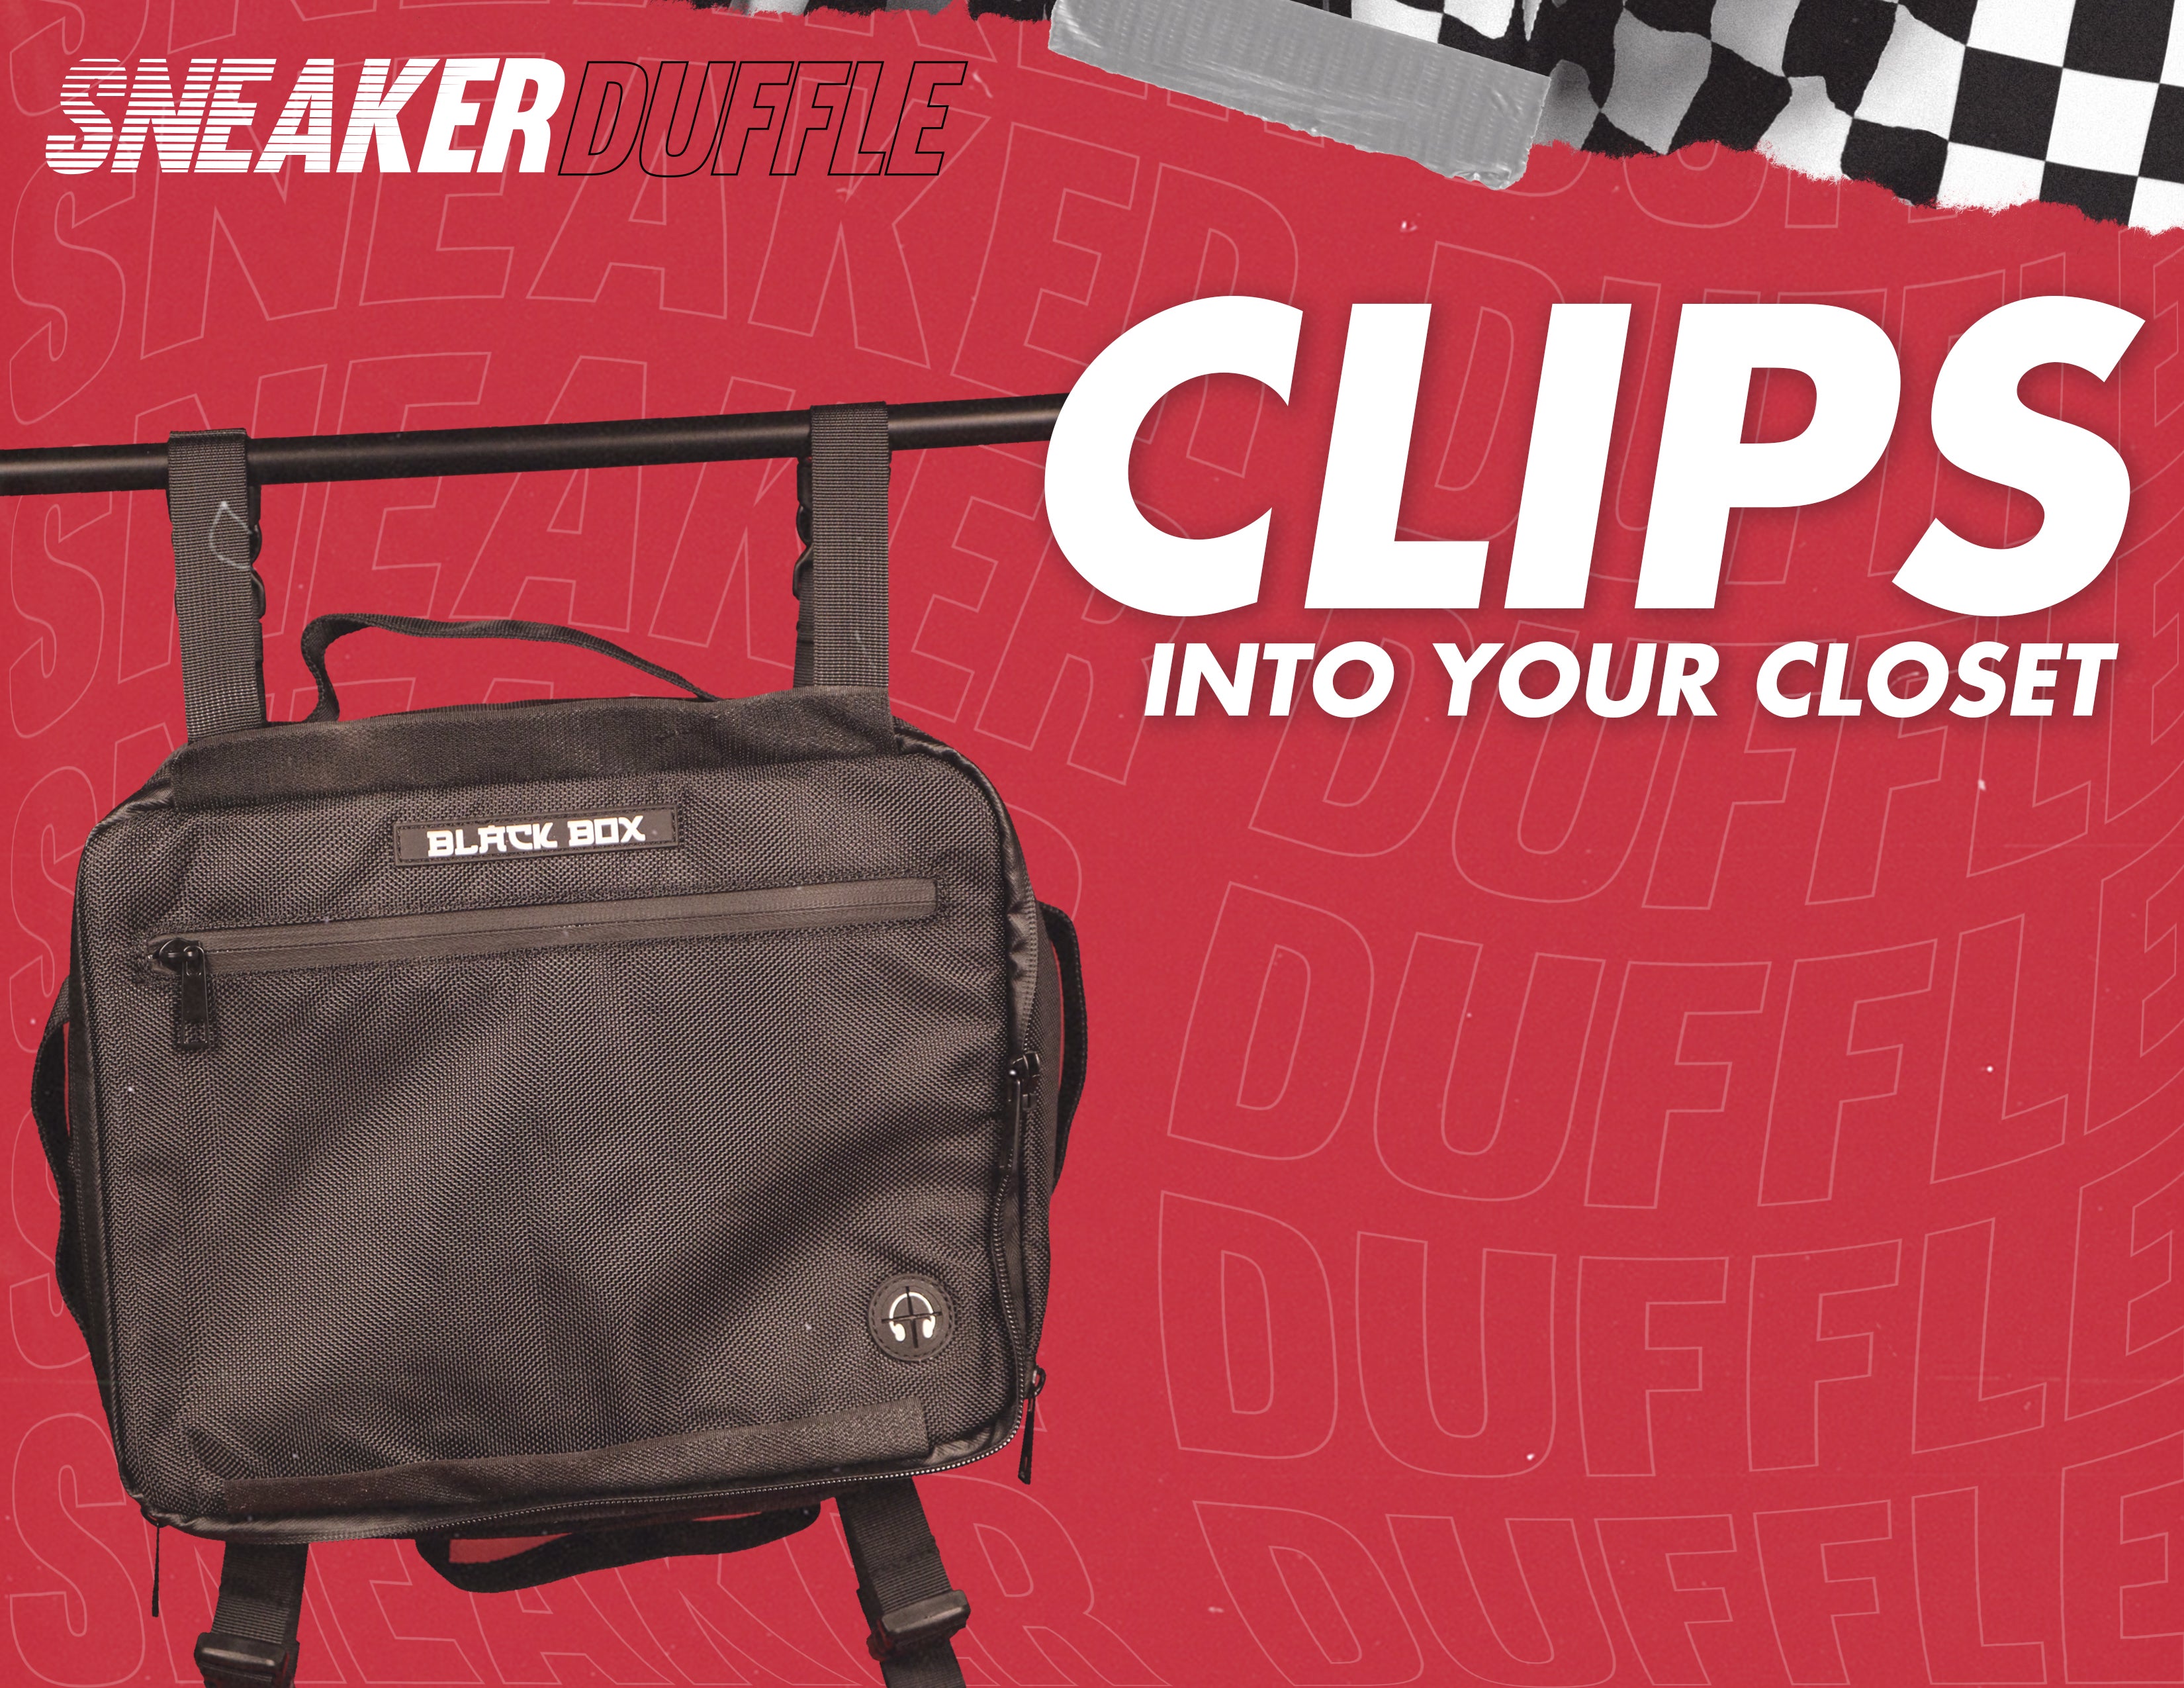 The clips found on the top of the Black Box Media camera bag are designed to clip into your closet rod.